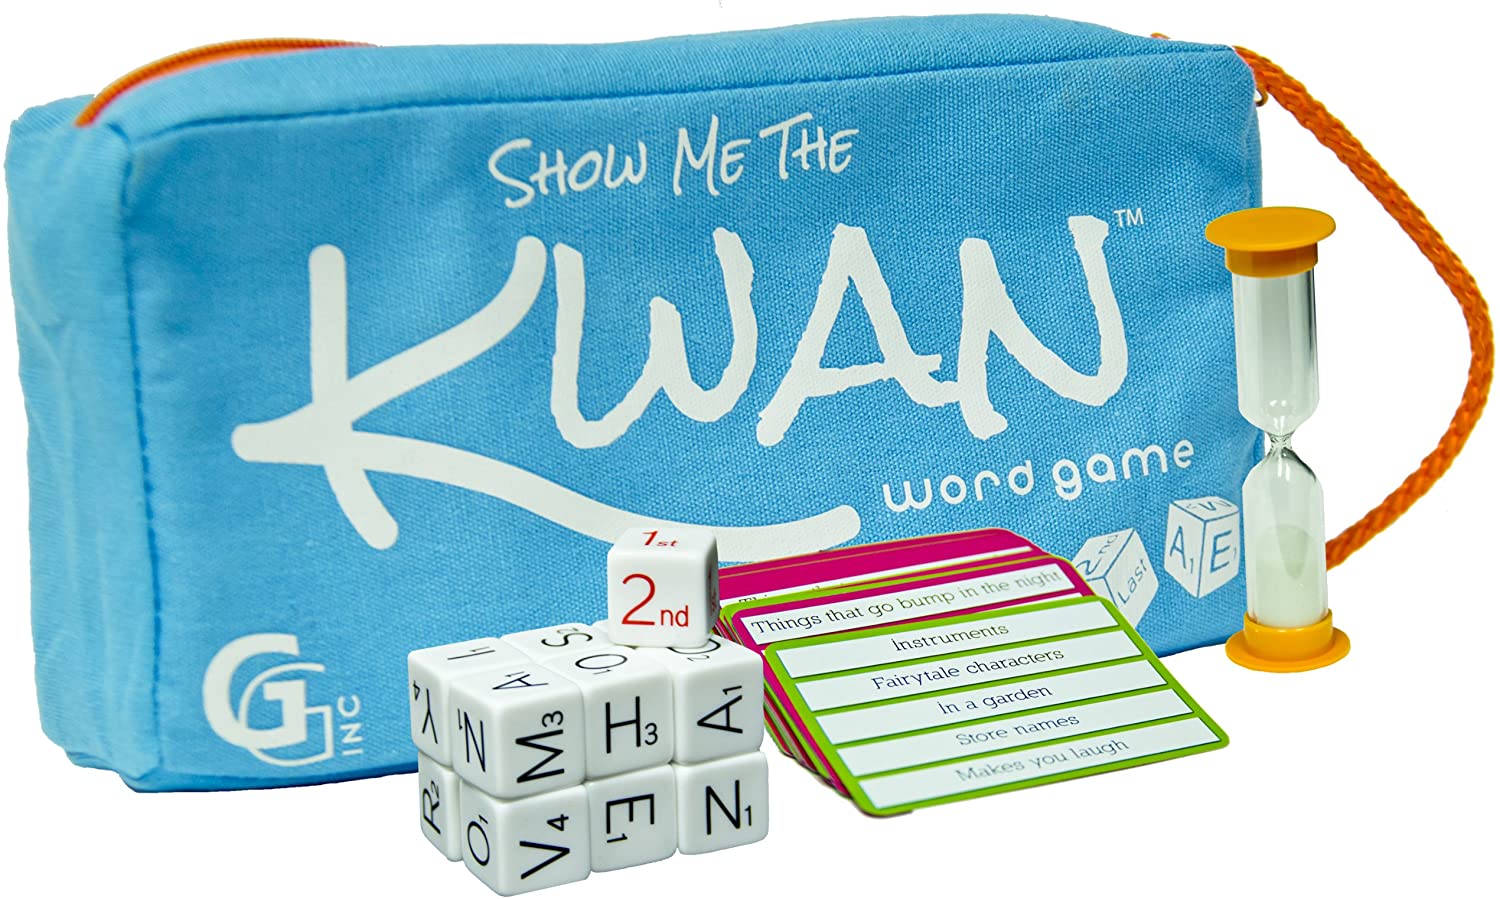 Show Me The Kwan